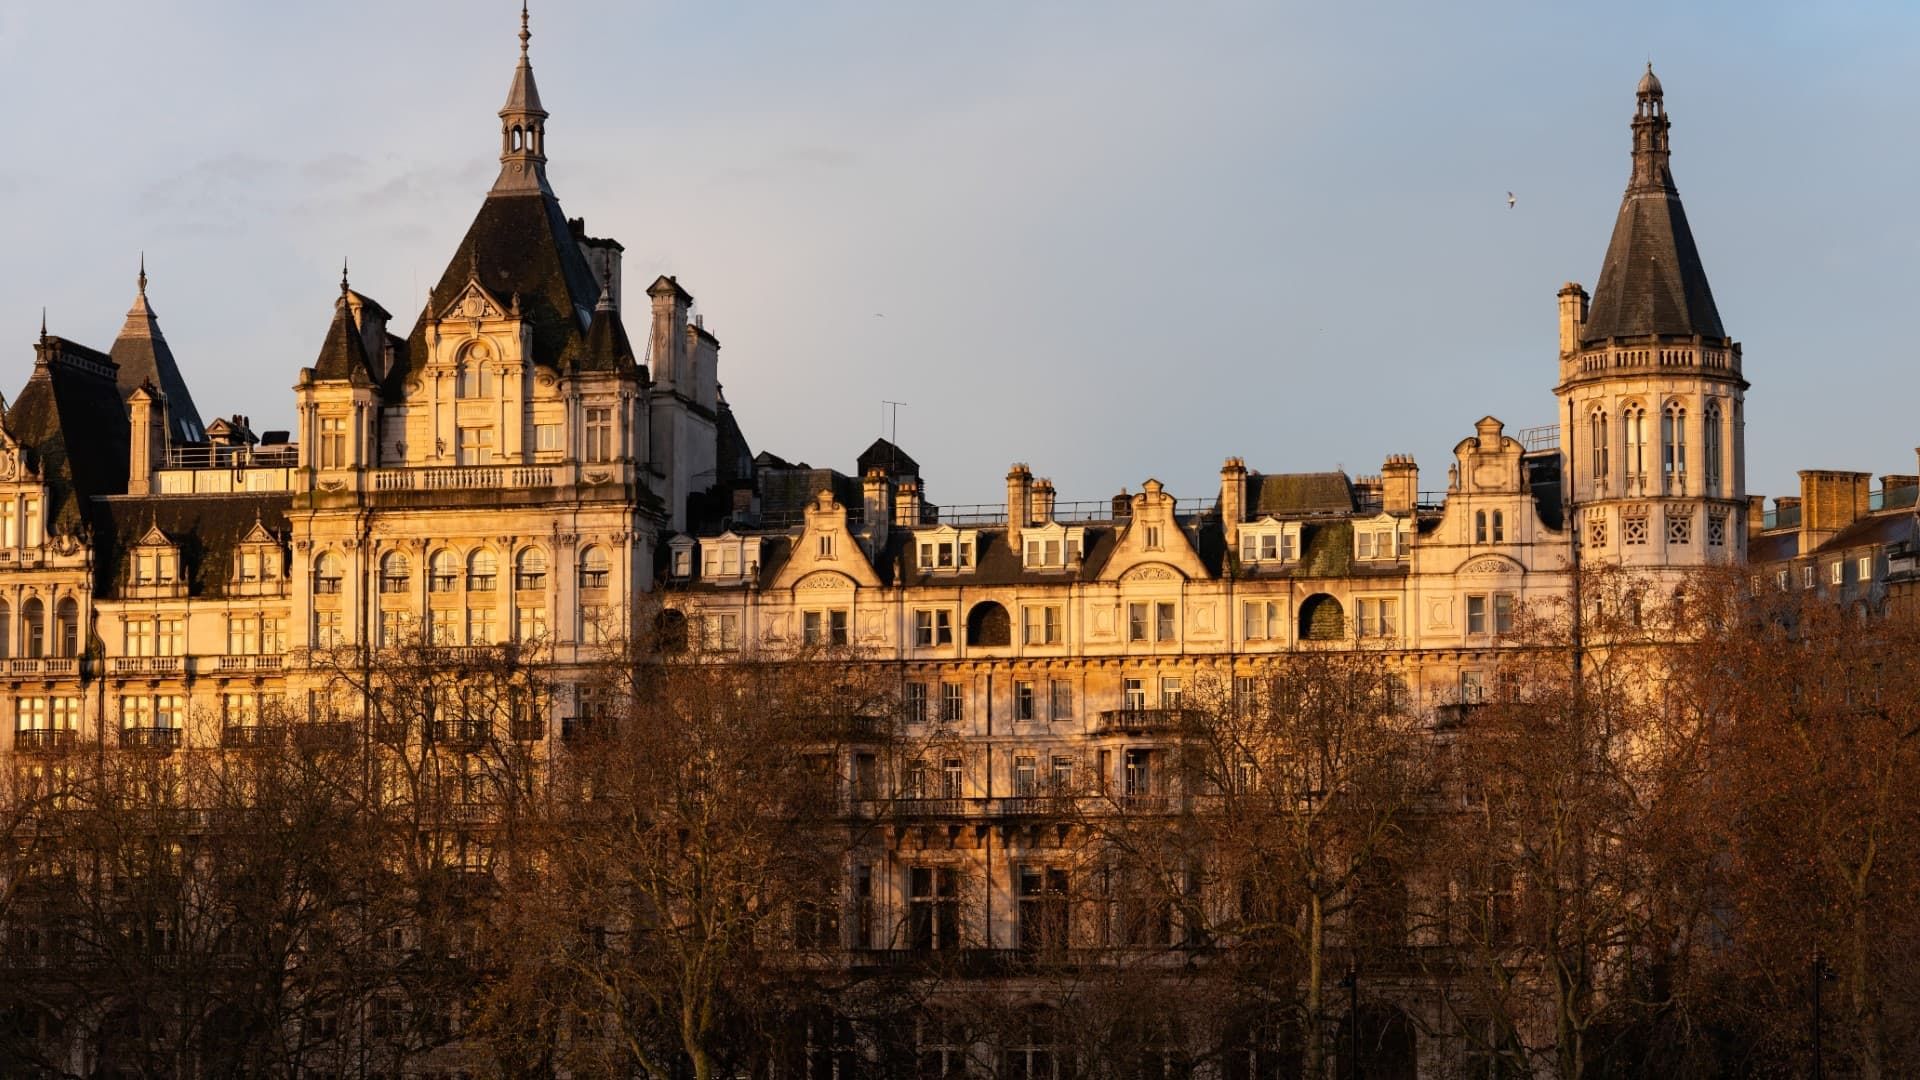 Local Attractions near The Royal Horseguards Hotel 